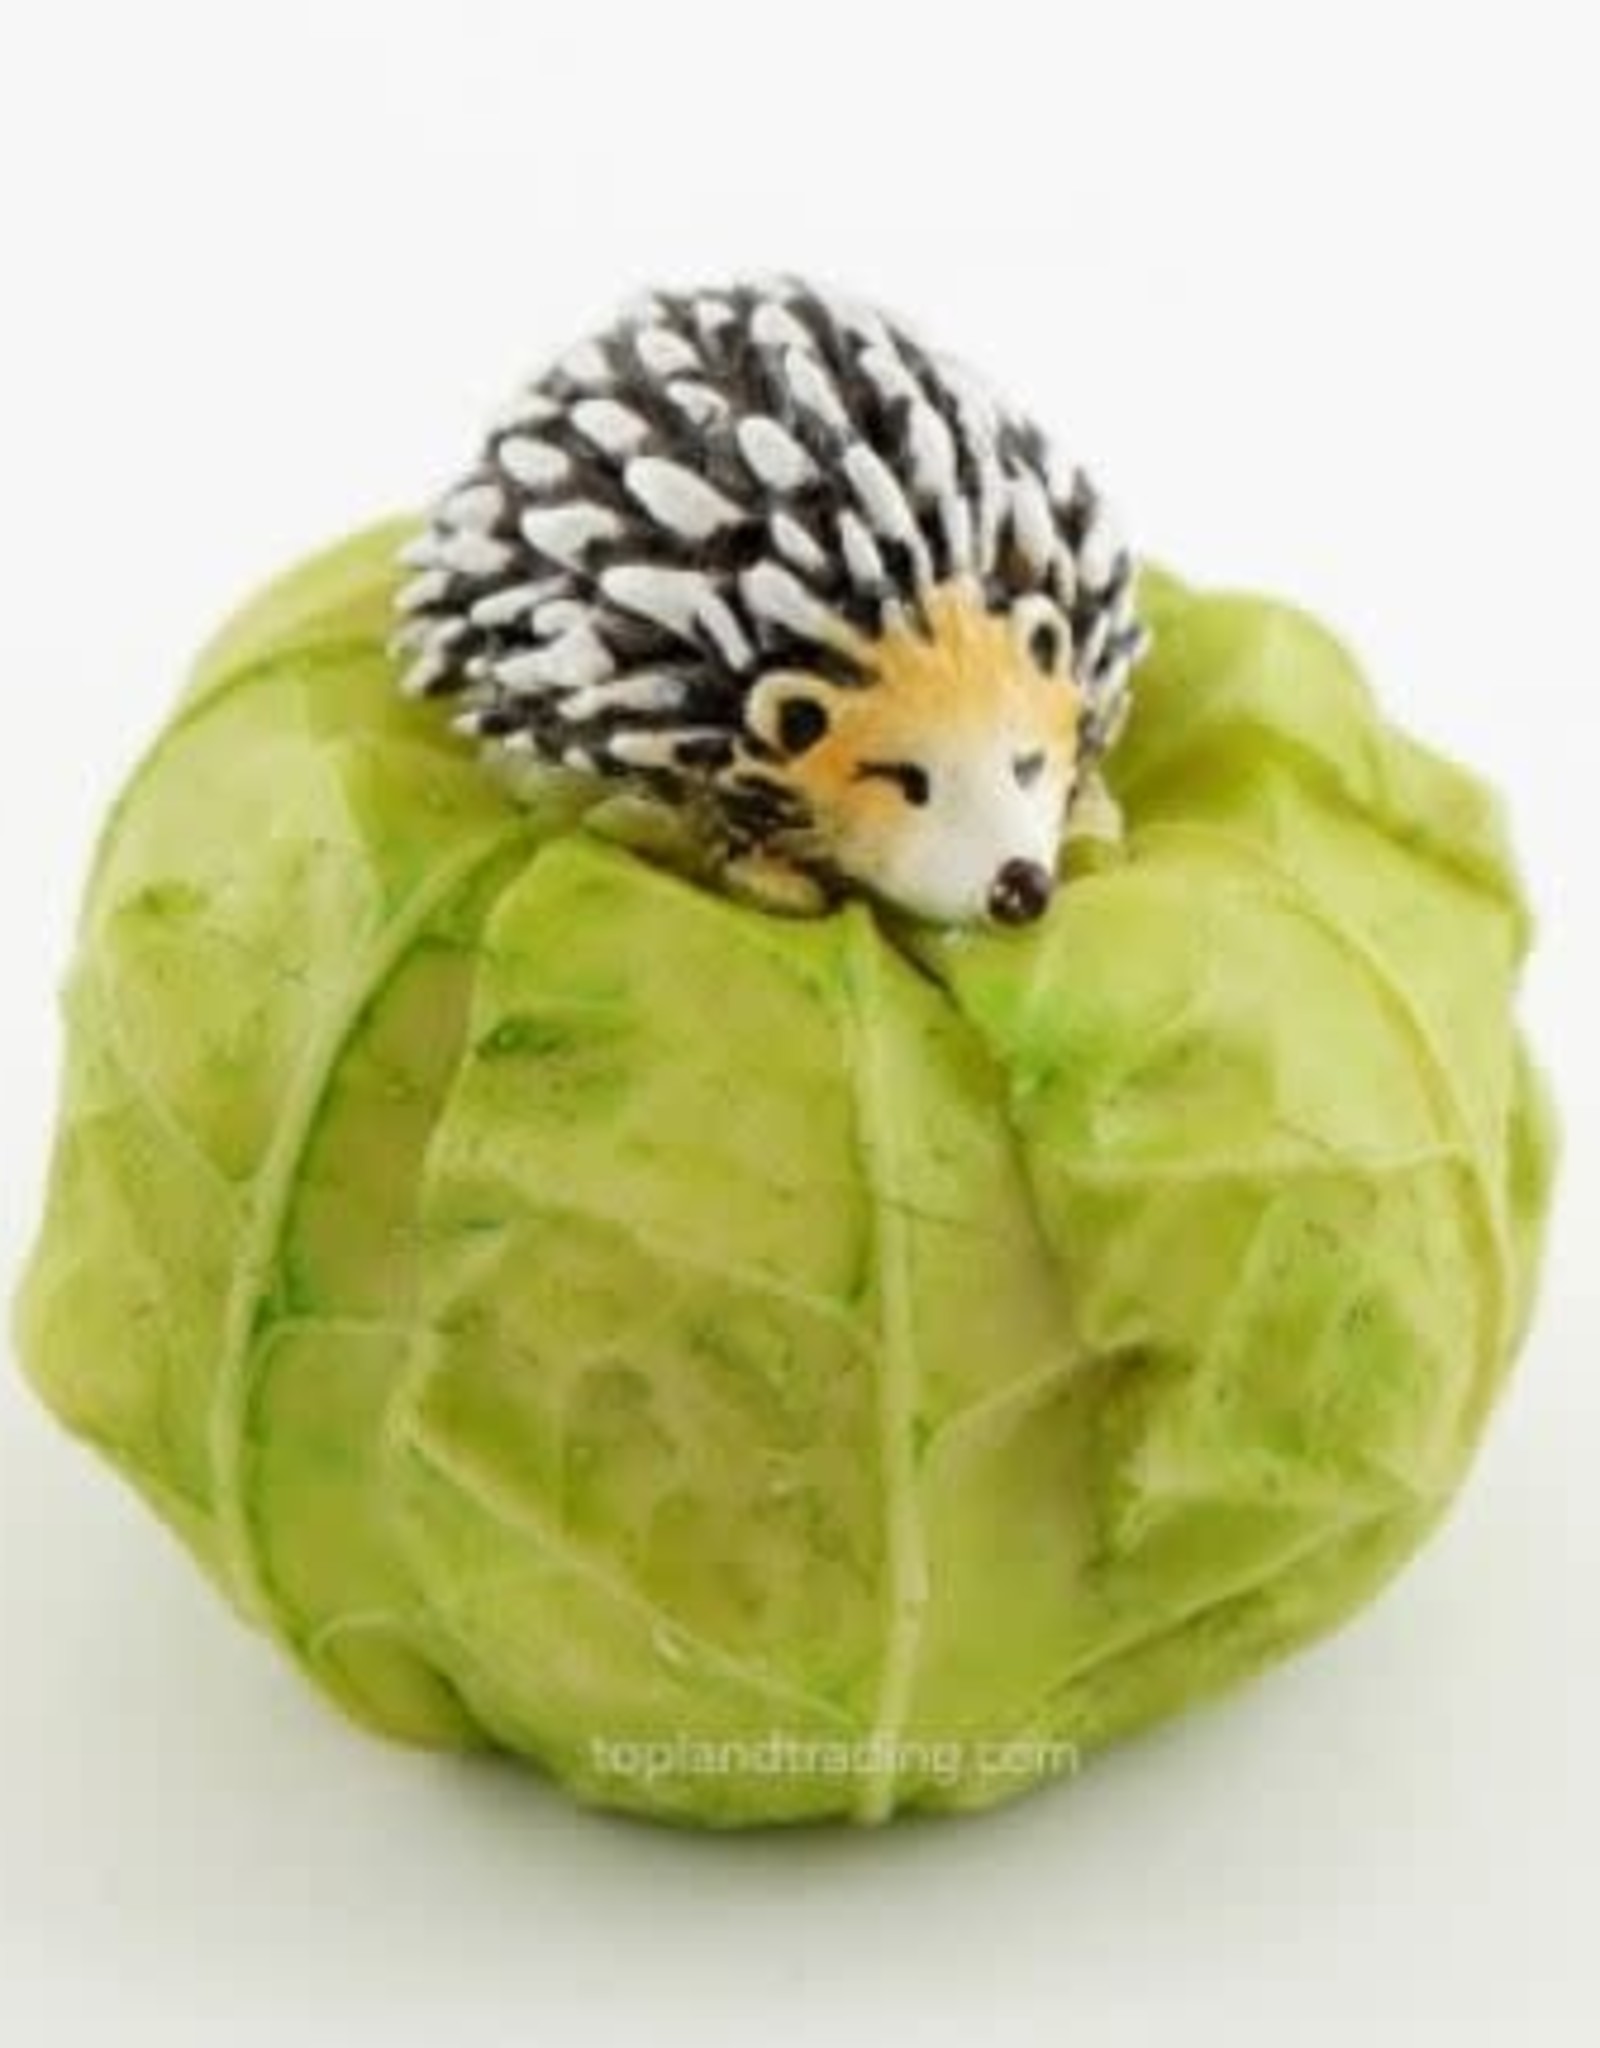 Top Land Trading MINI HEDGEHOG ON CABBAGE